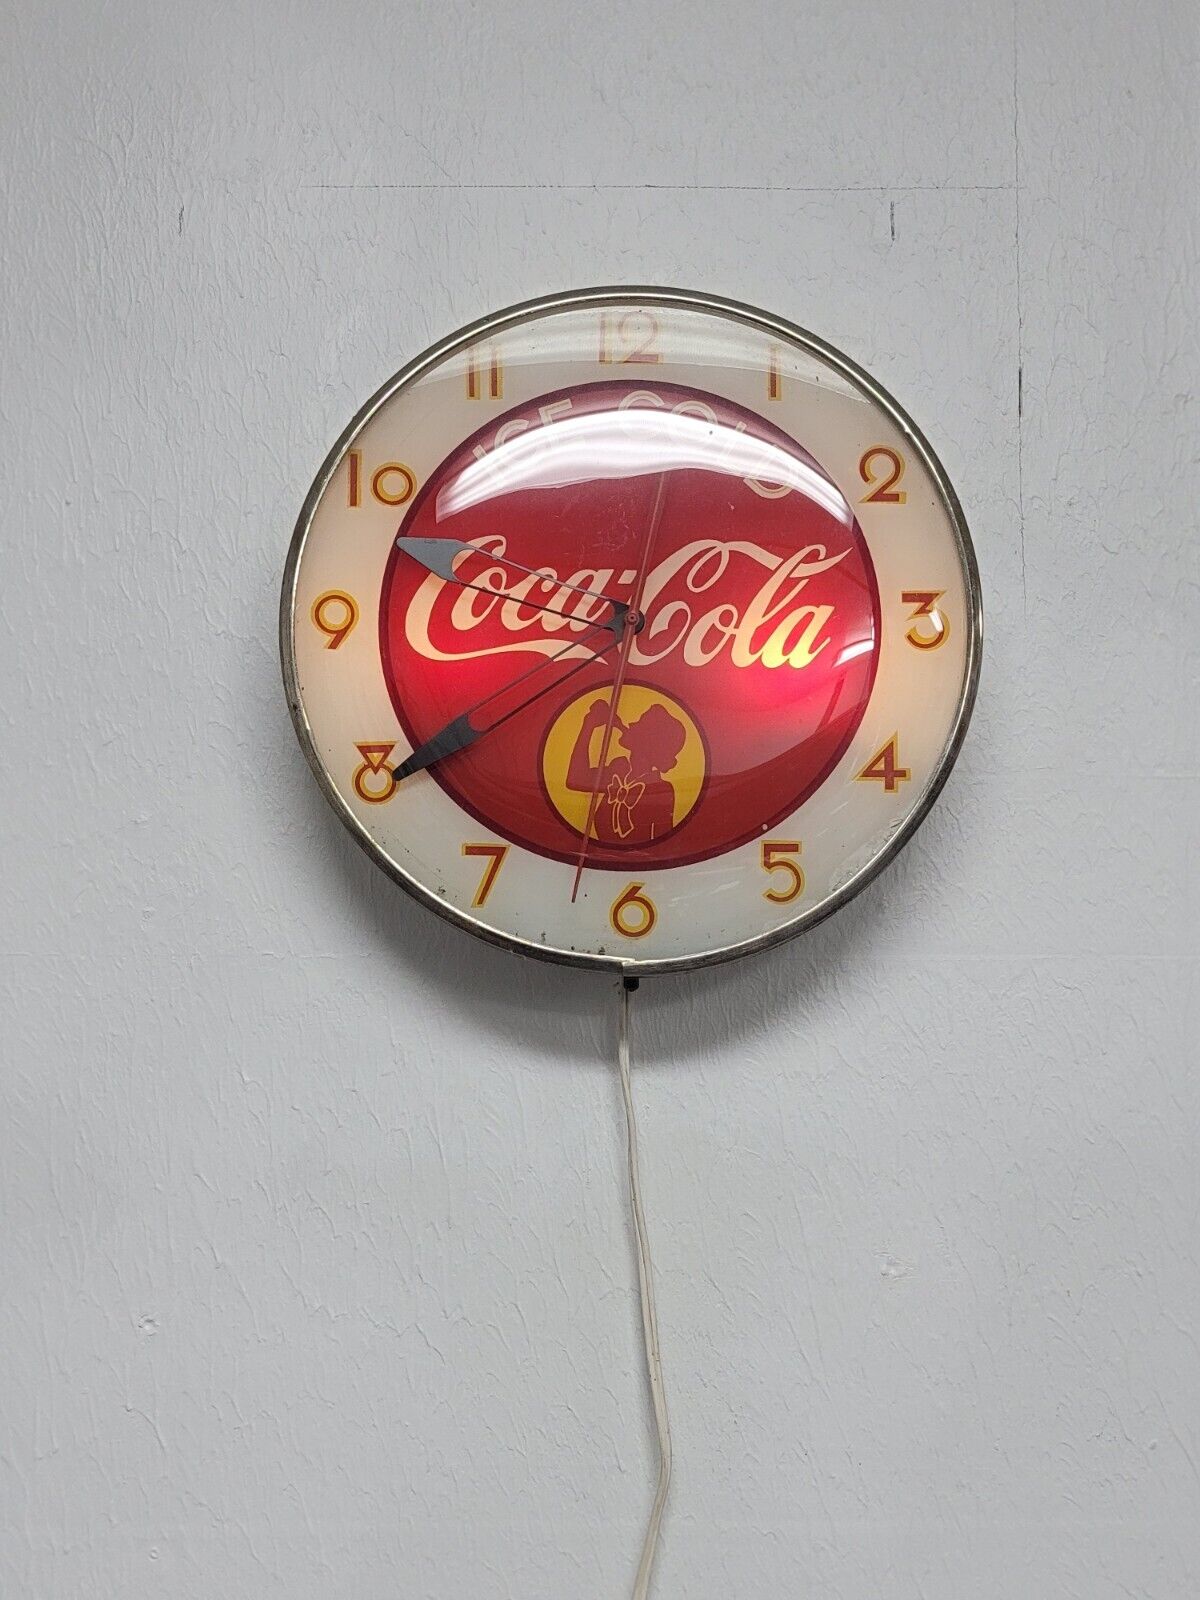 VINTAGE ICE COLD COCA COLA Silhouette Girl Clock - Works